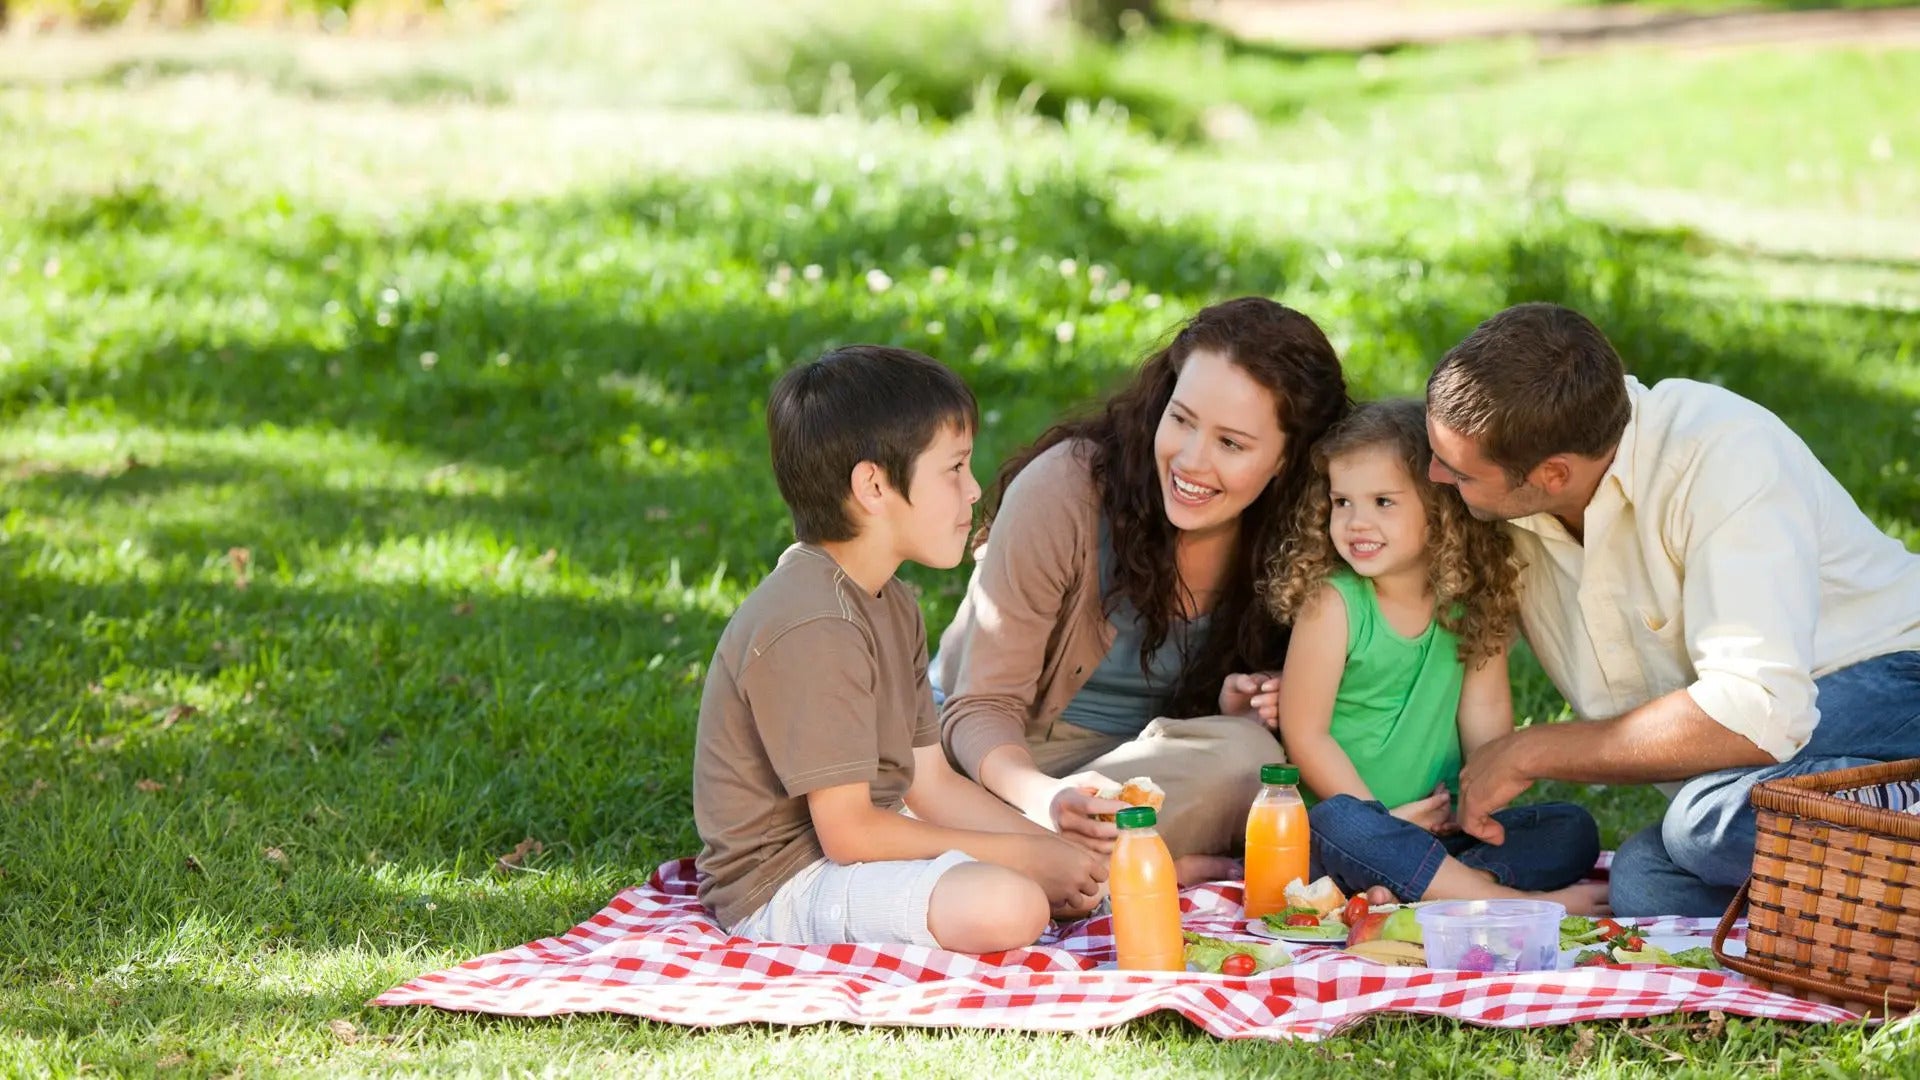 Savour Moments & Morsels: Delight in a Picnic with Loved Ones